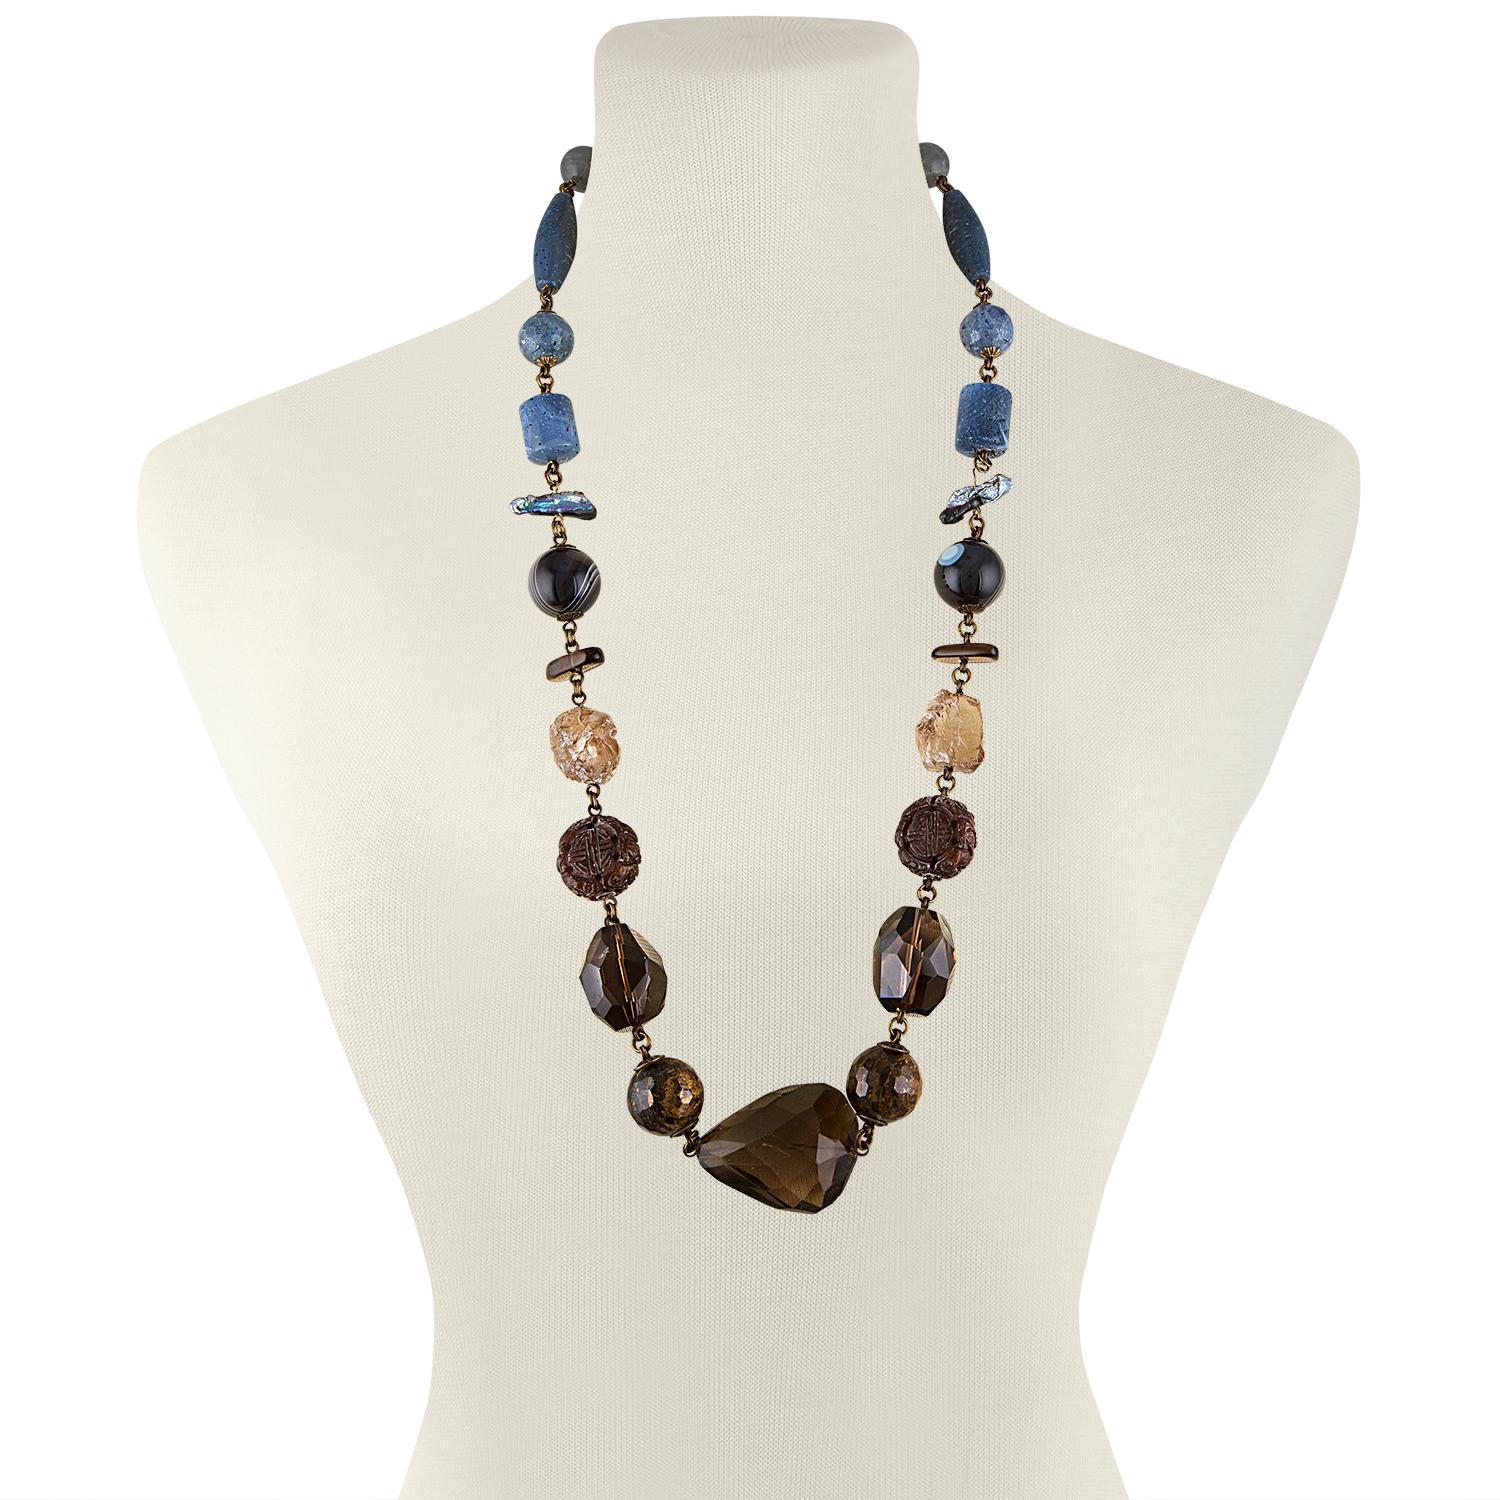 Stephen Dweck Long Necklace
The necklace is brass 
There is Blue Coral, Topaz, Cultured Pearl, Agate, Crystal, Tiger Eye, etc.
The necklace is 30